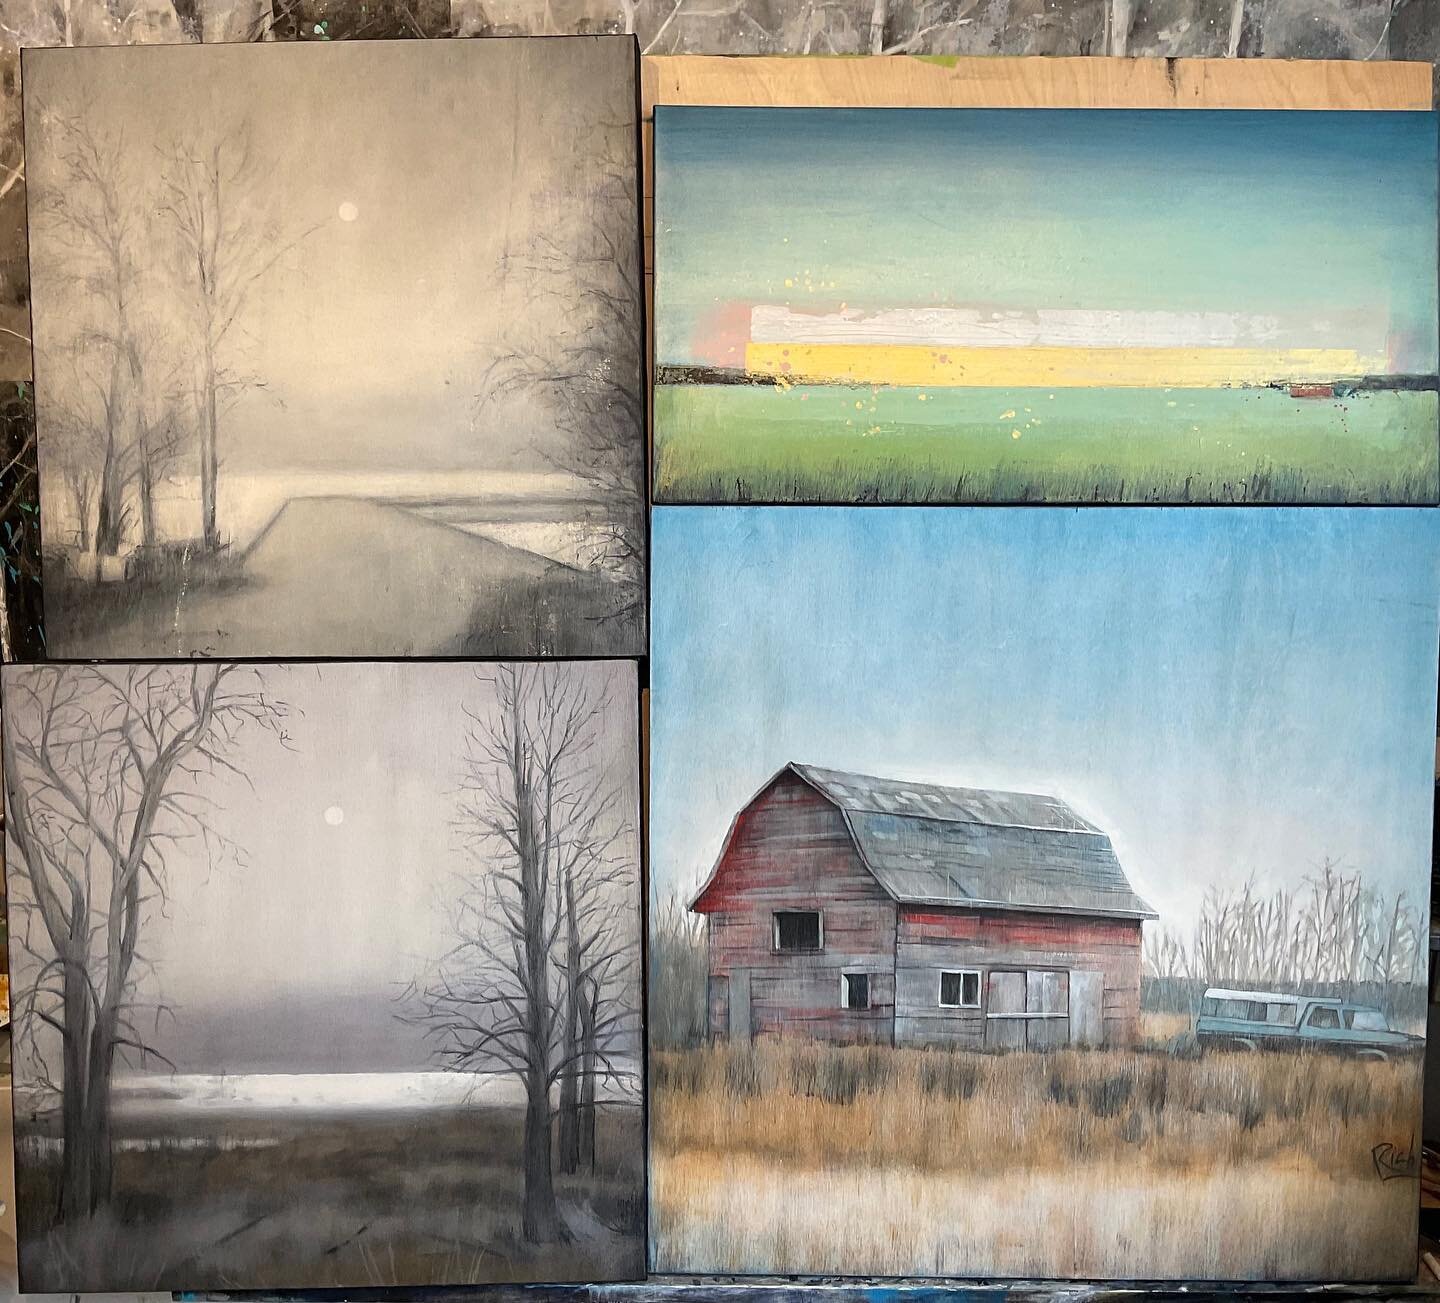 A few older pieces recropped and reworked for an upcoming studio sale. Stay tuned for details. 
@gallerylacosse 169 lilac av 
#studiosale #artsale #artoncanvas #contemporarypainter #winnipegartist #wpg #wpgnow #wpgoftheday #pegcity #gallerylacosse